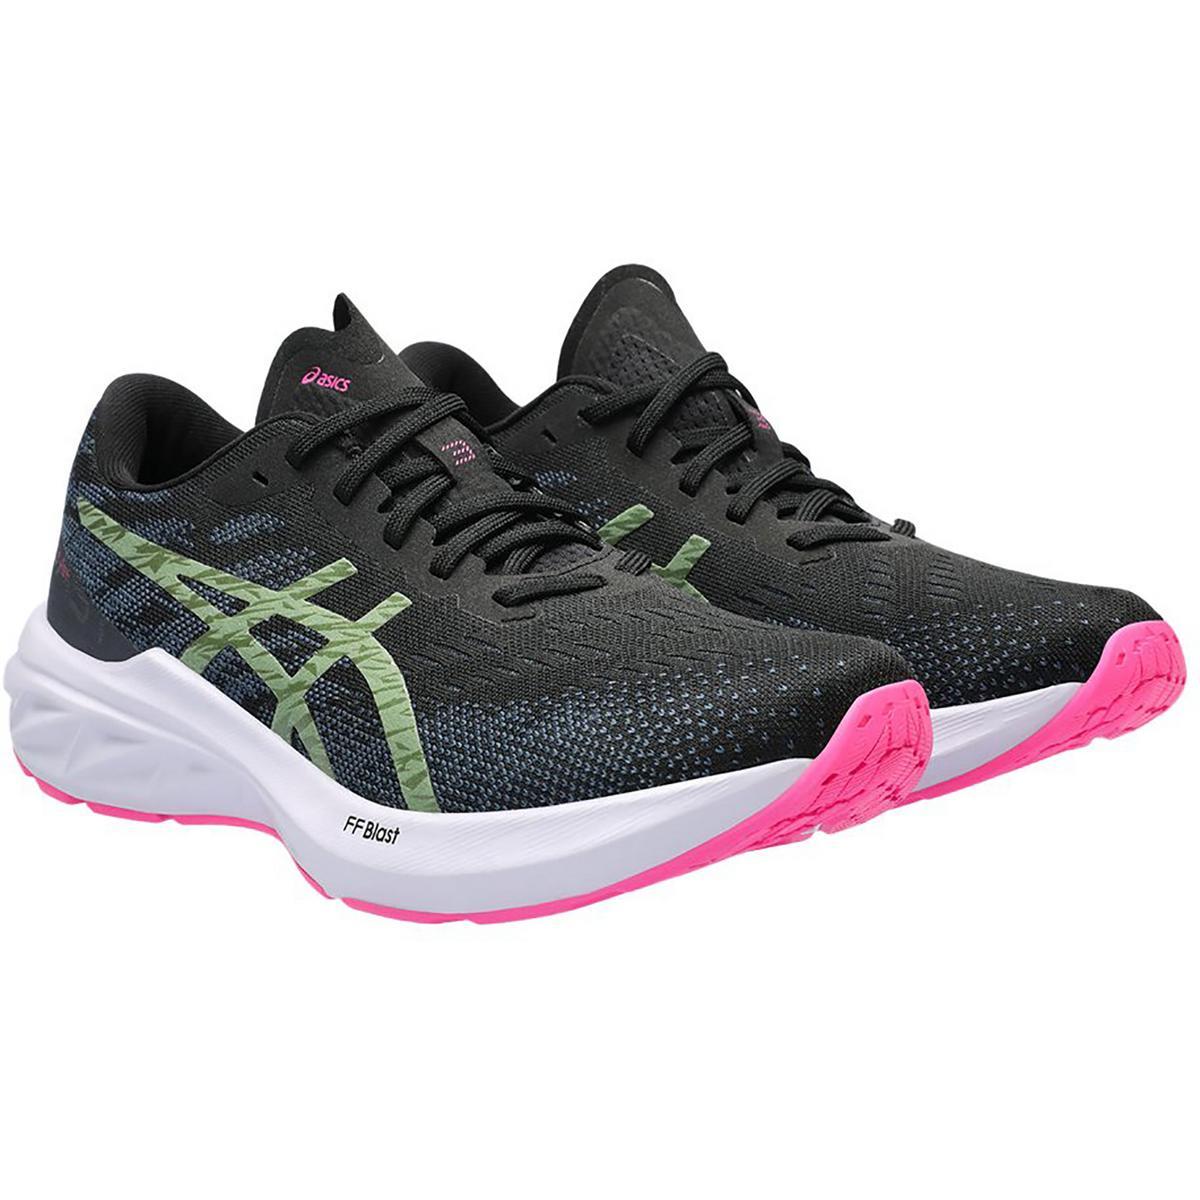 Asics Womens Dynablast 3 Fitness Athletic and Training Shoes Sneakers Bhfo 5342 Black/Cedar Green